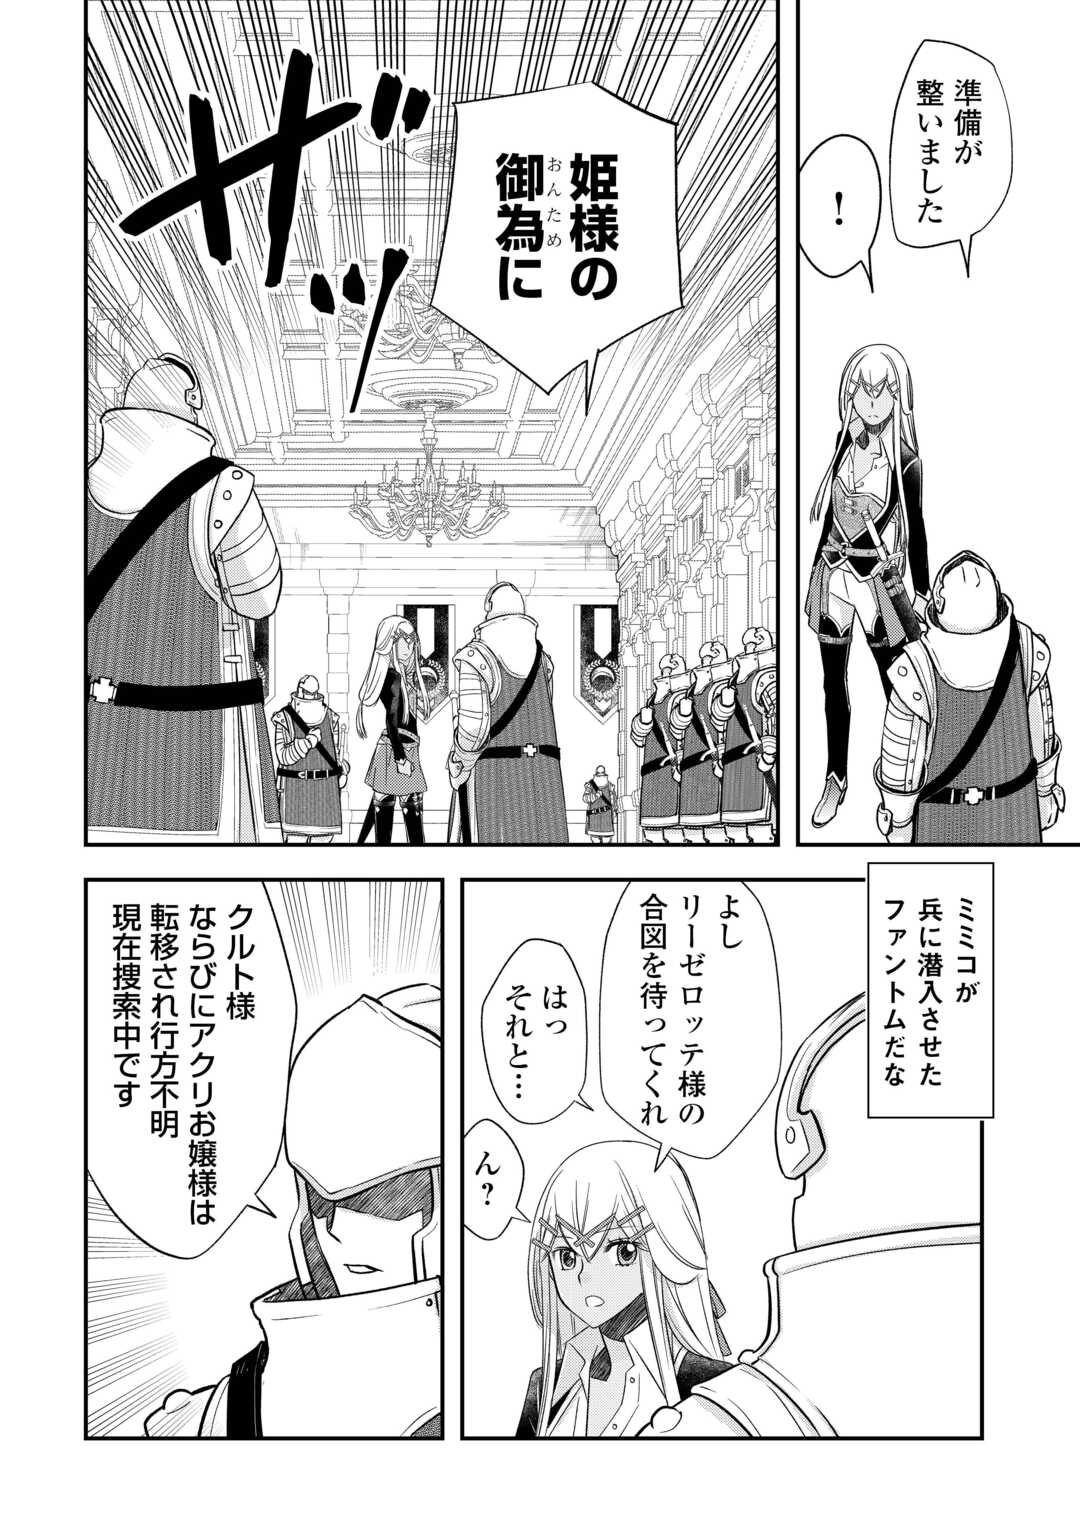 Kanchigai no Atelier Meister - Chapter 45 - Page 2